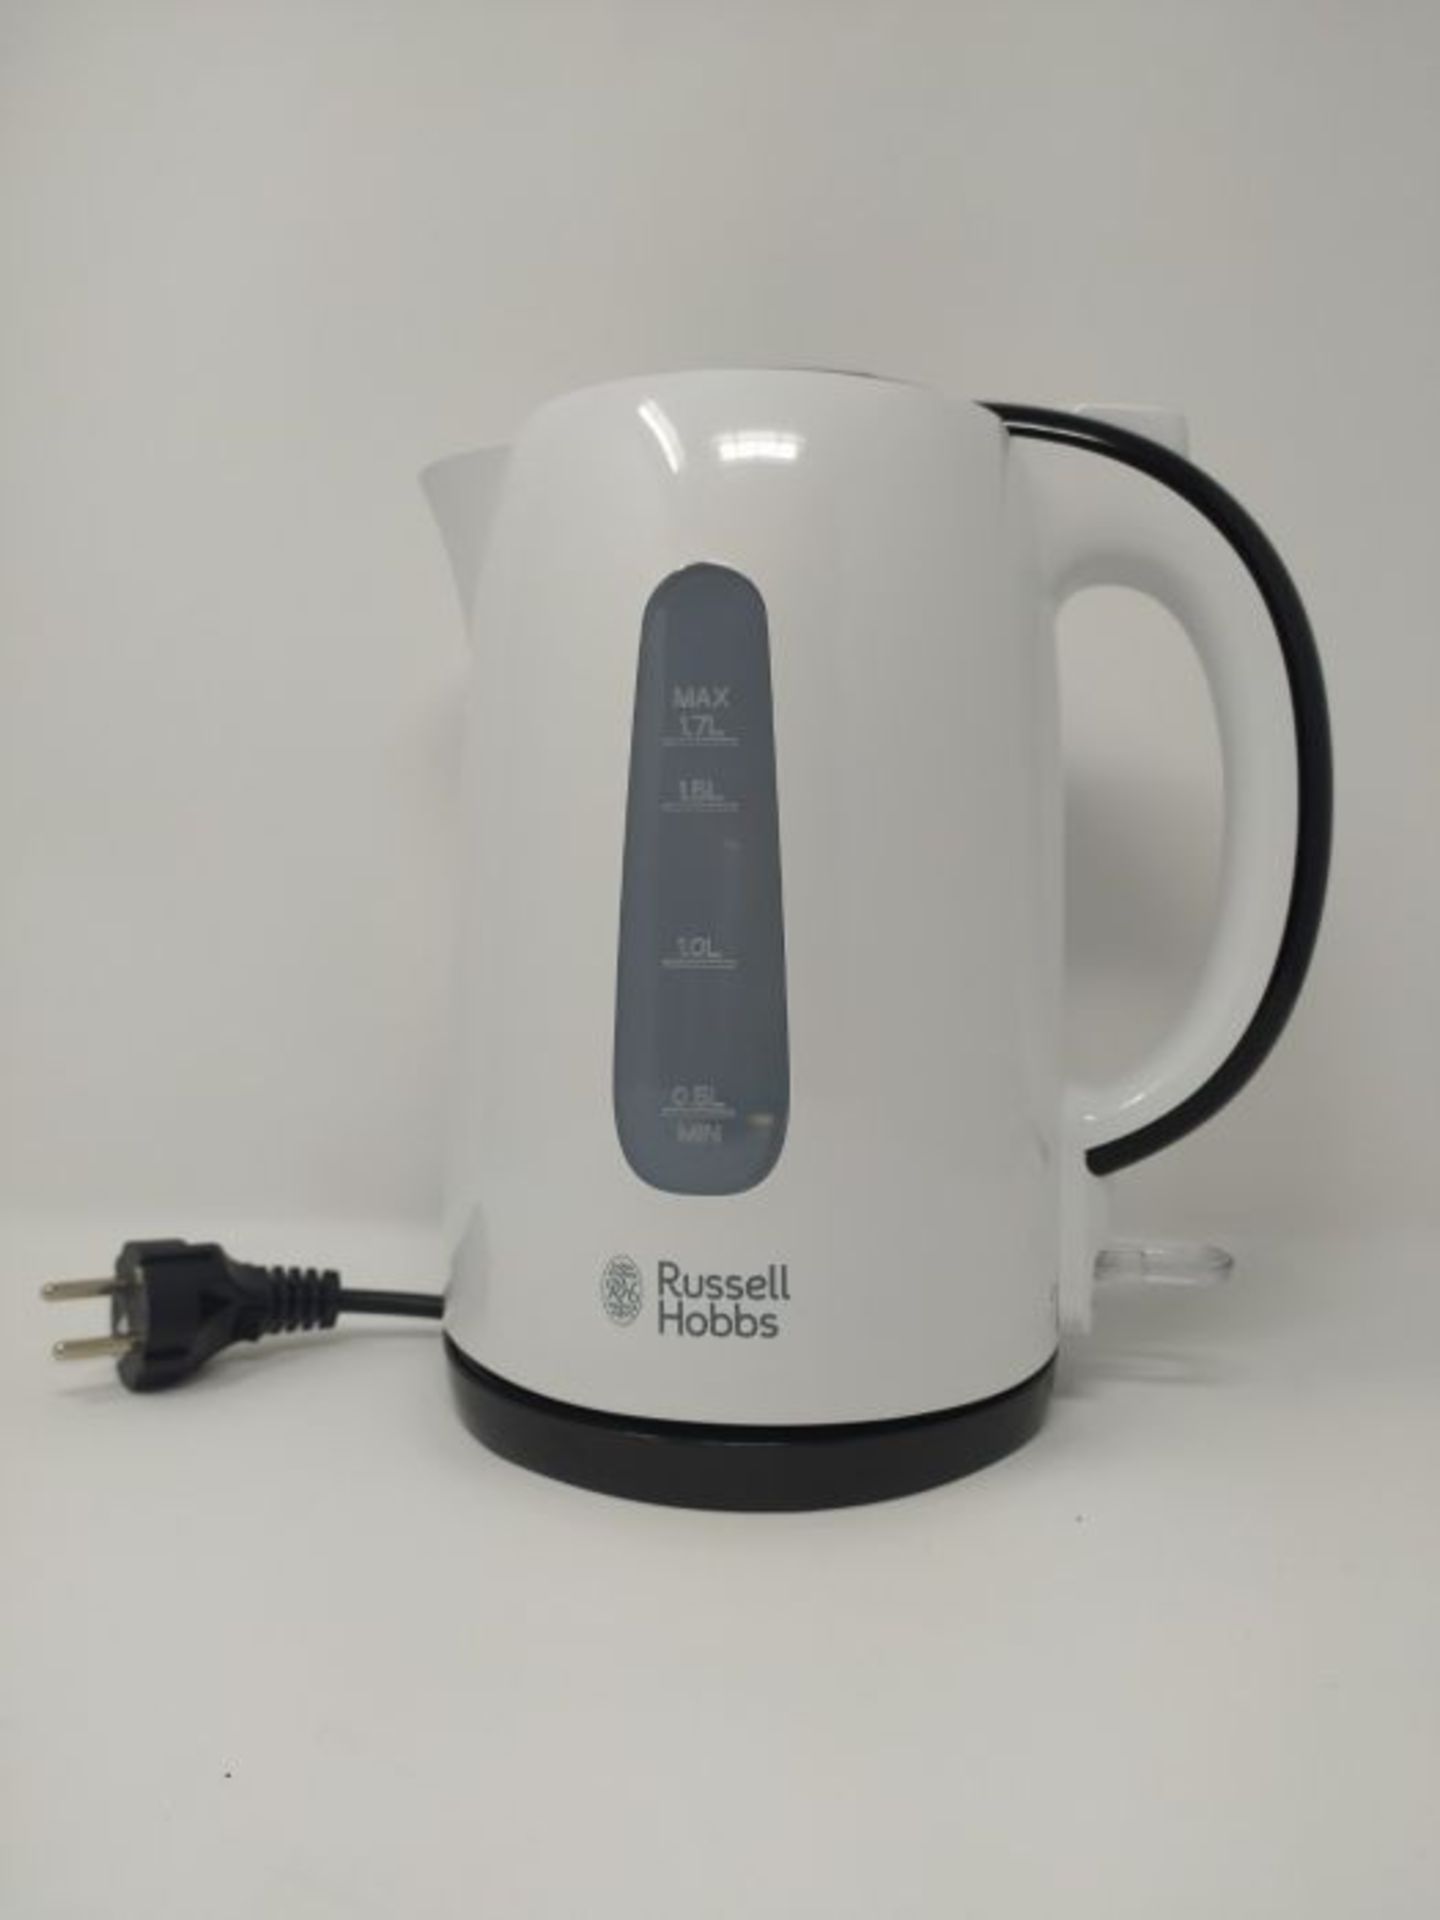 Russell Hobbs 25070-70 1.7L Black, White electric kettle - electric kettles - Image 3 of 3